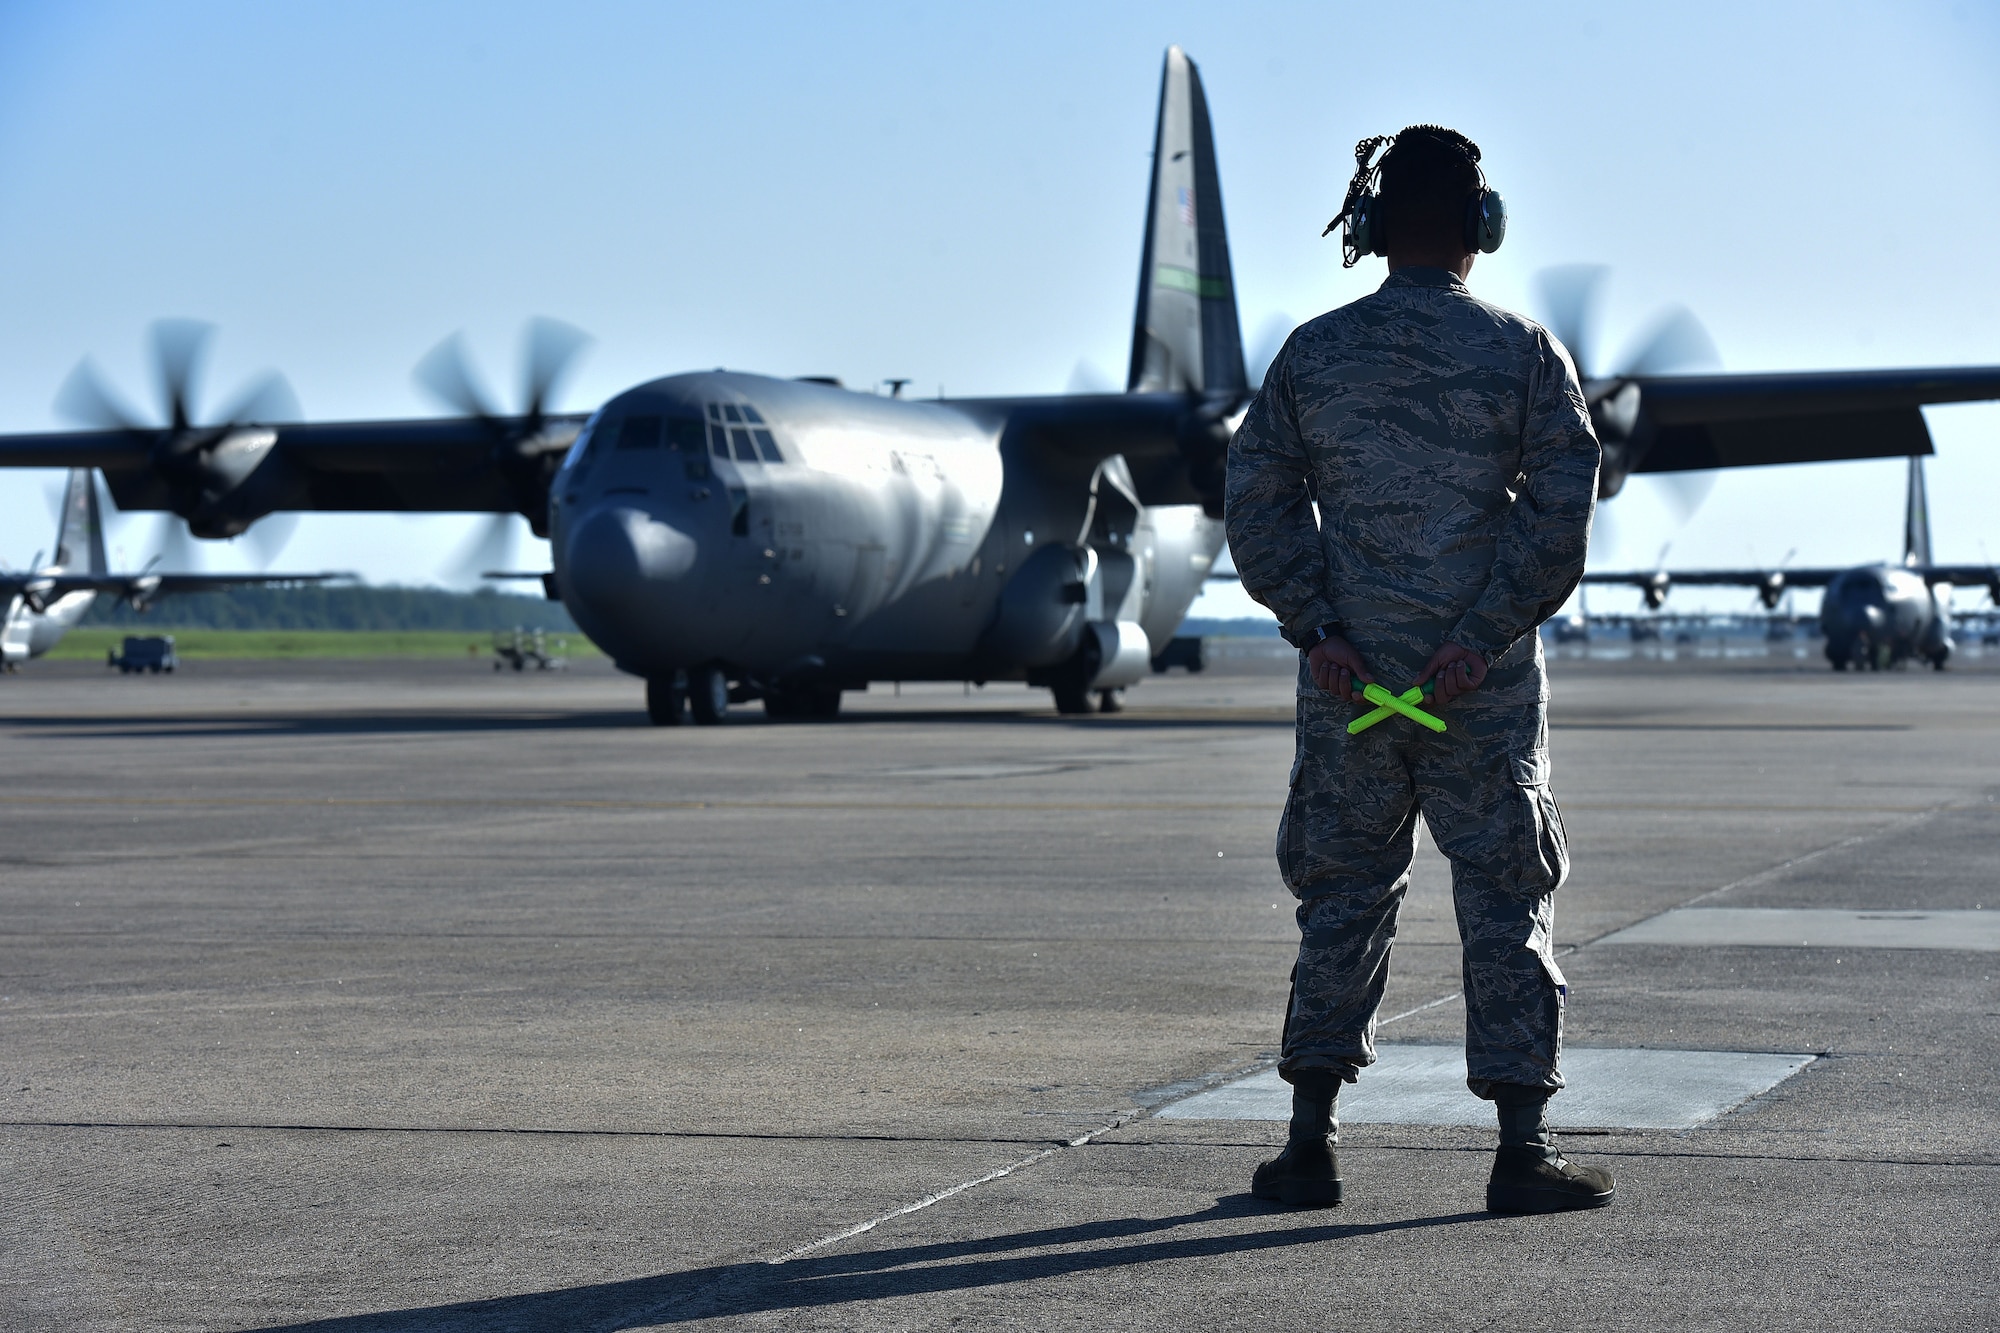 Airman 1st Class Omar Campos, 19th Airlift Maintenance Squadron crew chief, readies himself to marshal a C-130J taking members of Team Little Rock on the first leg of their trip to a deployment, at Little Rock Air Force Base, Ark. (U.S. Air Force photo by Airman Rhett Isbell)